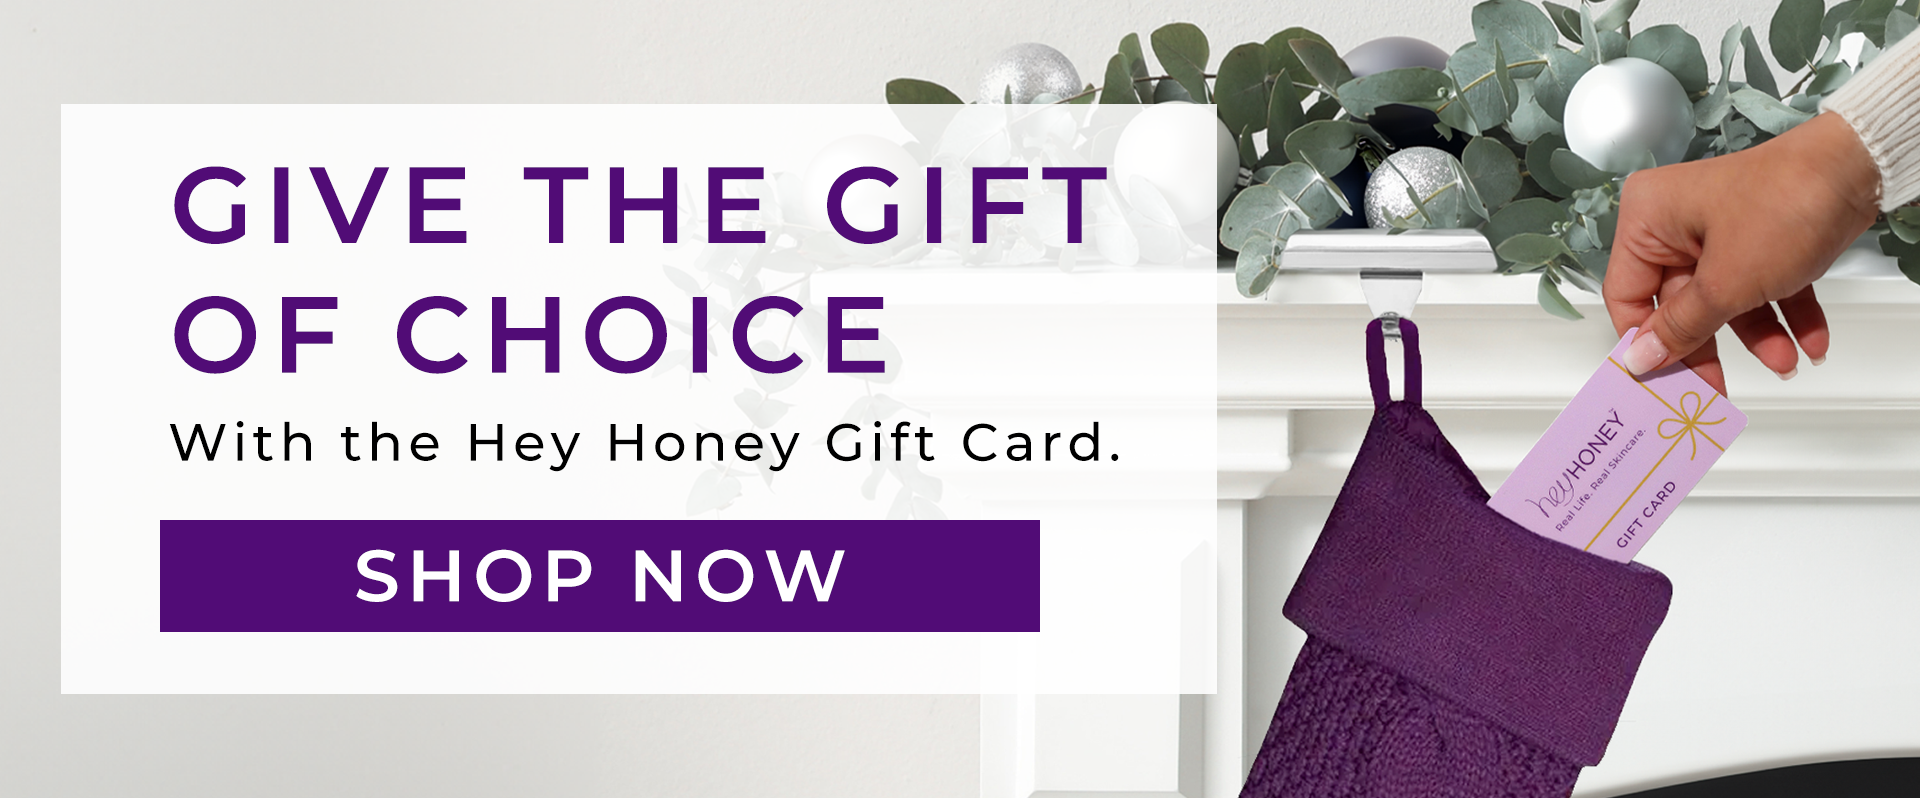 Gift_Card_Promo_Banner_332d5d34-1f25-4f19-9368-d0e61a1620eb.png